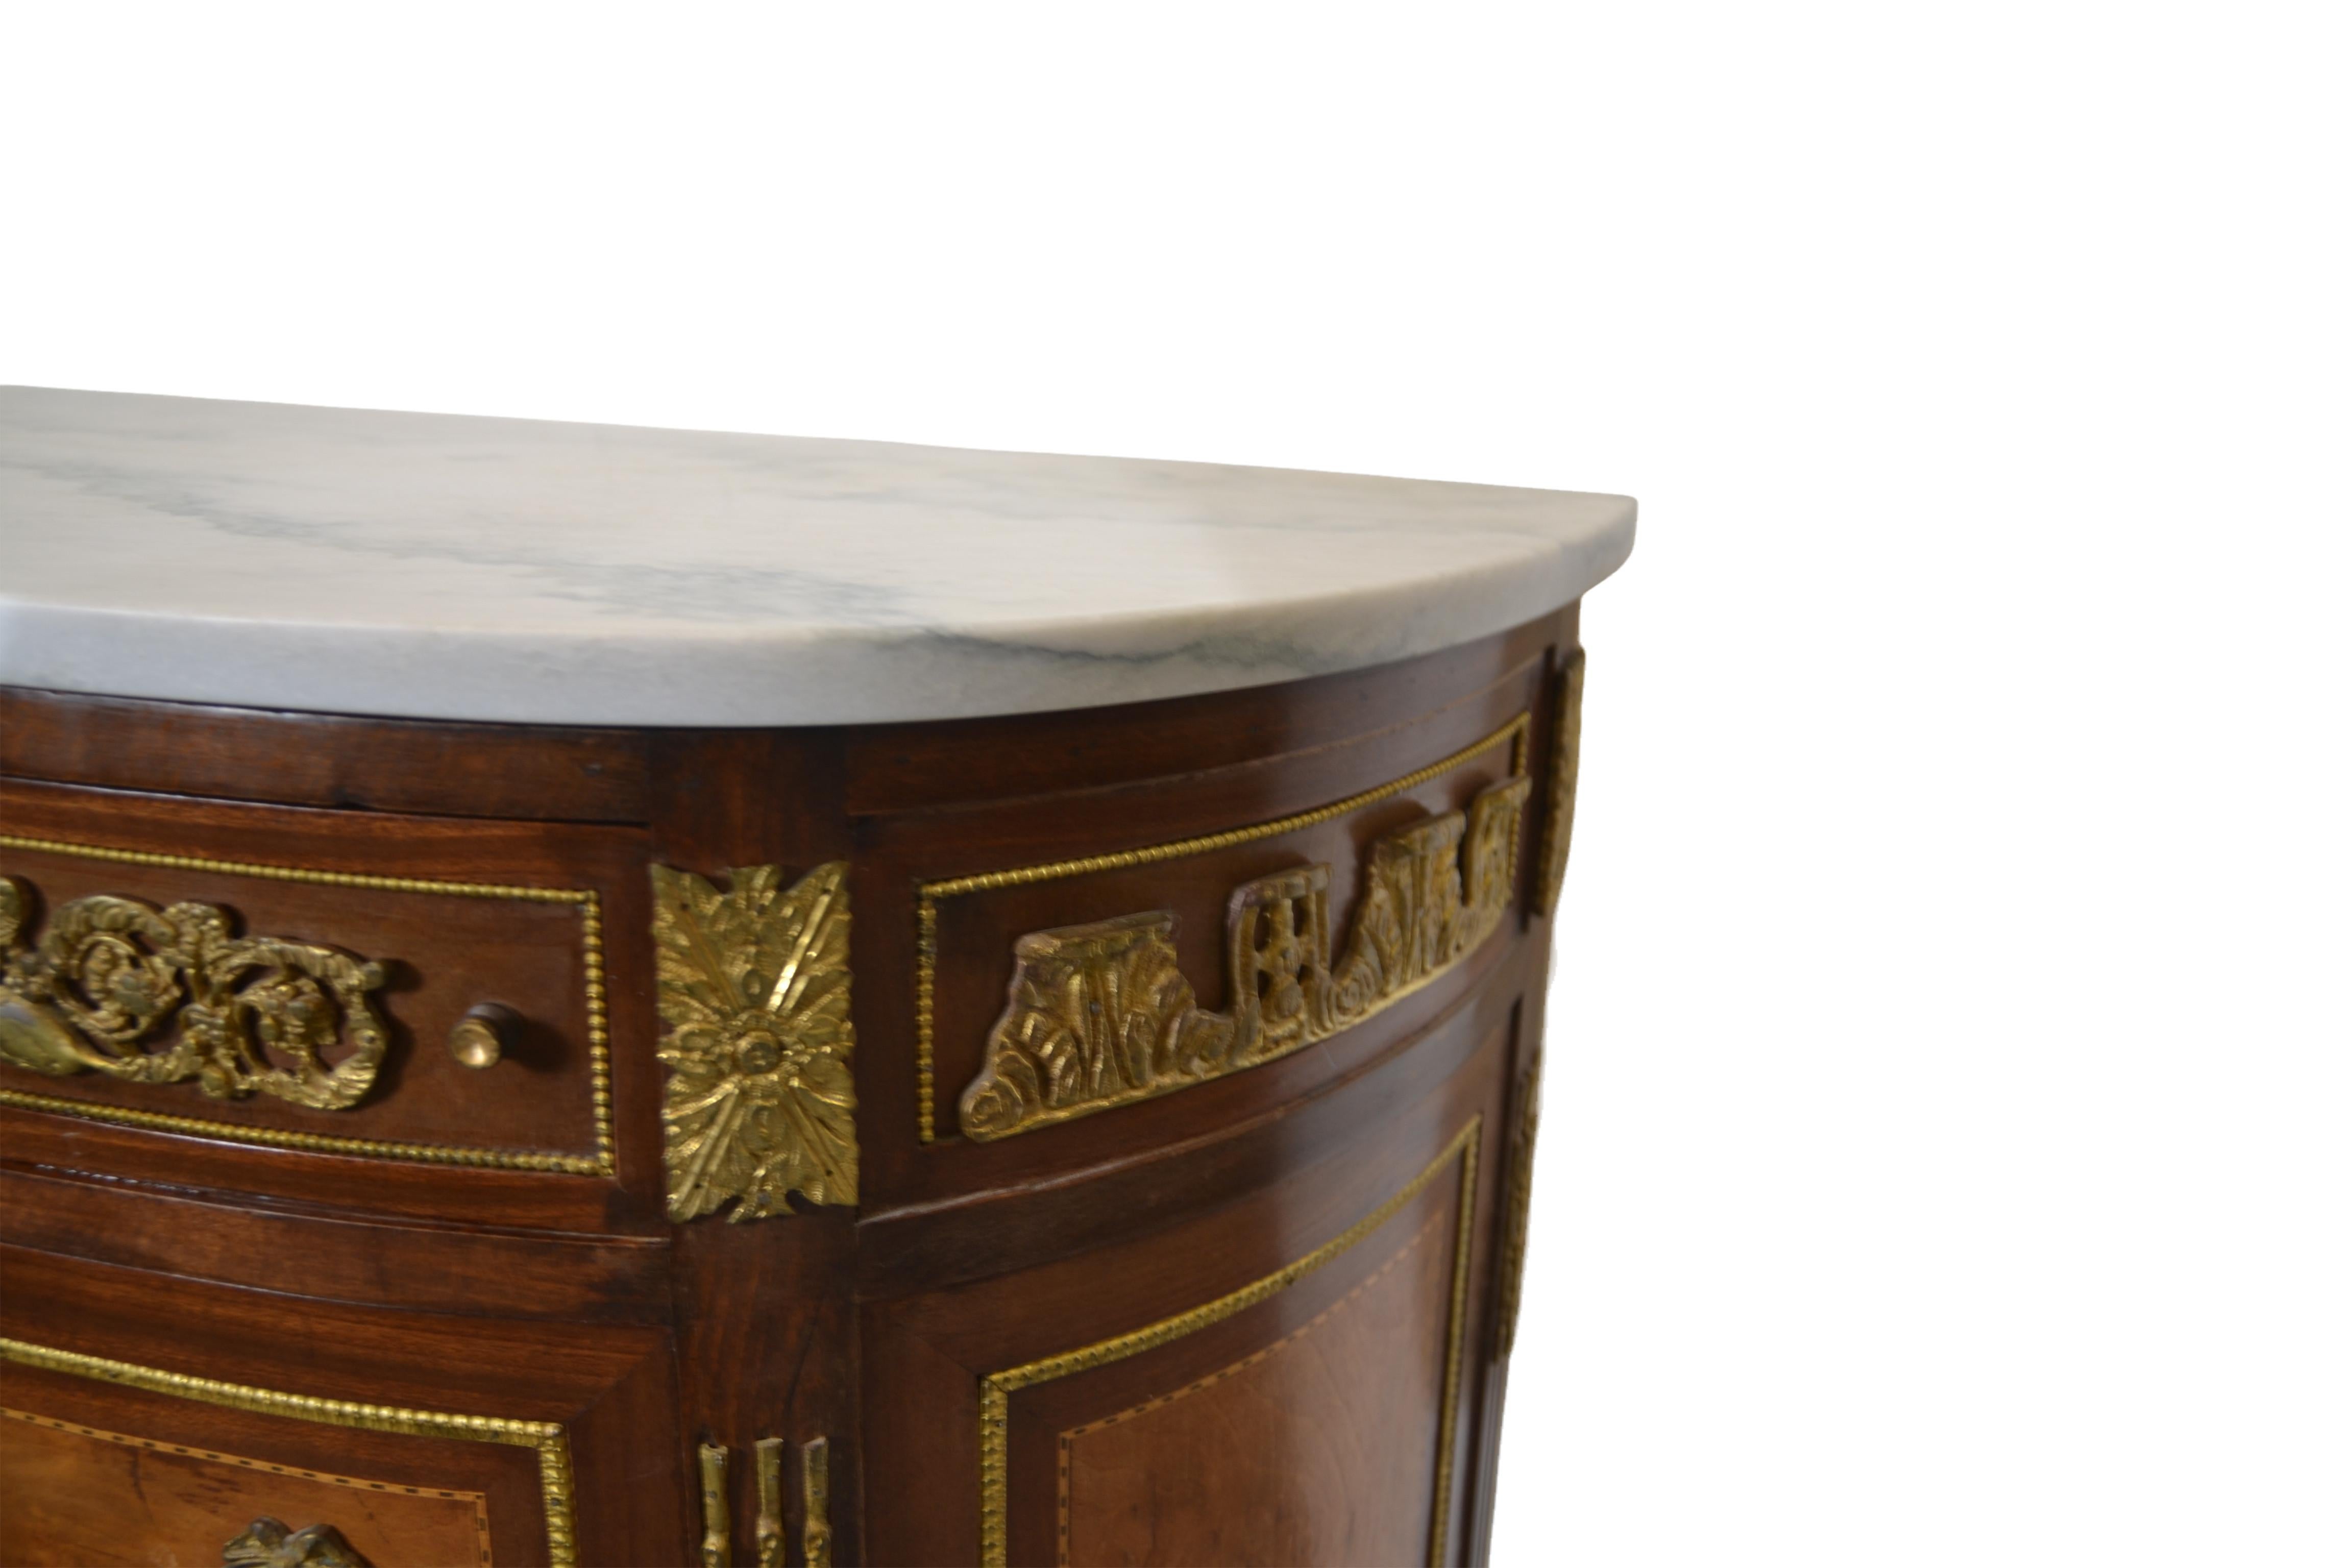 Demilune style marble top commode has dark and light wood colors. It has one small and two large drawers and detailed brass accents on the sides and the front.